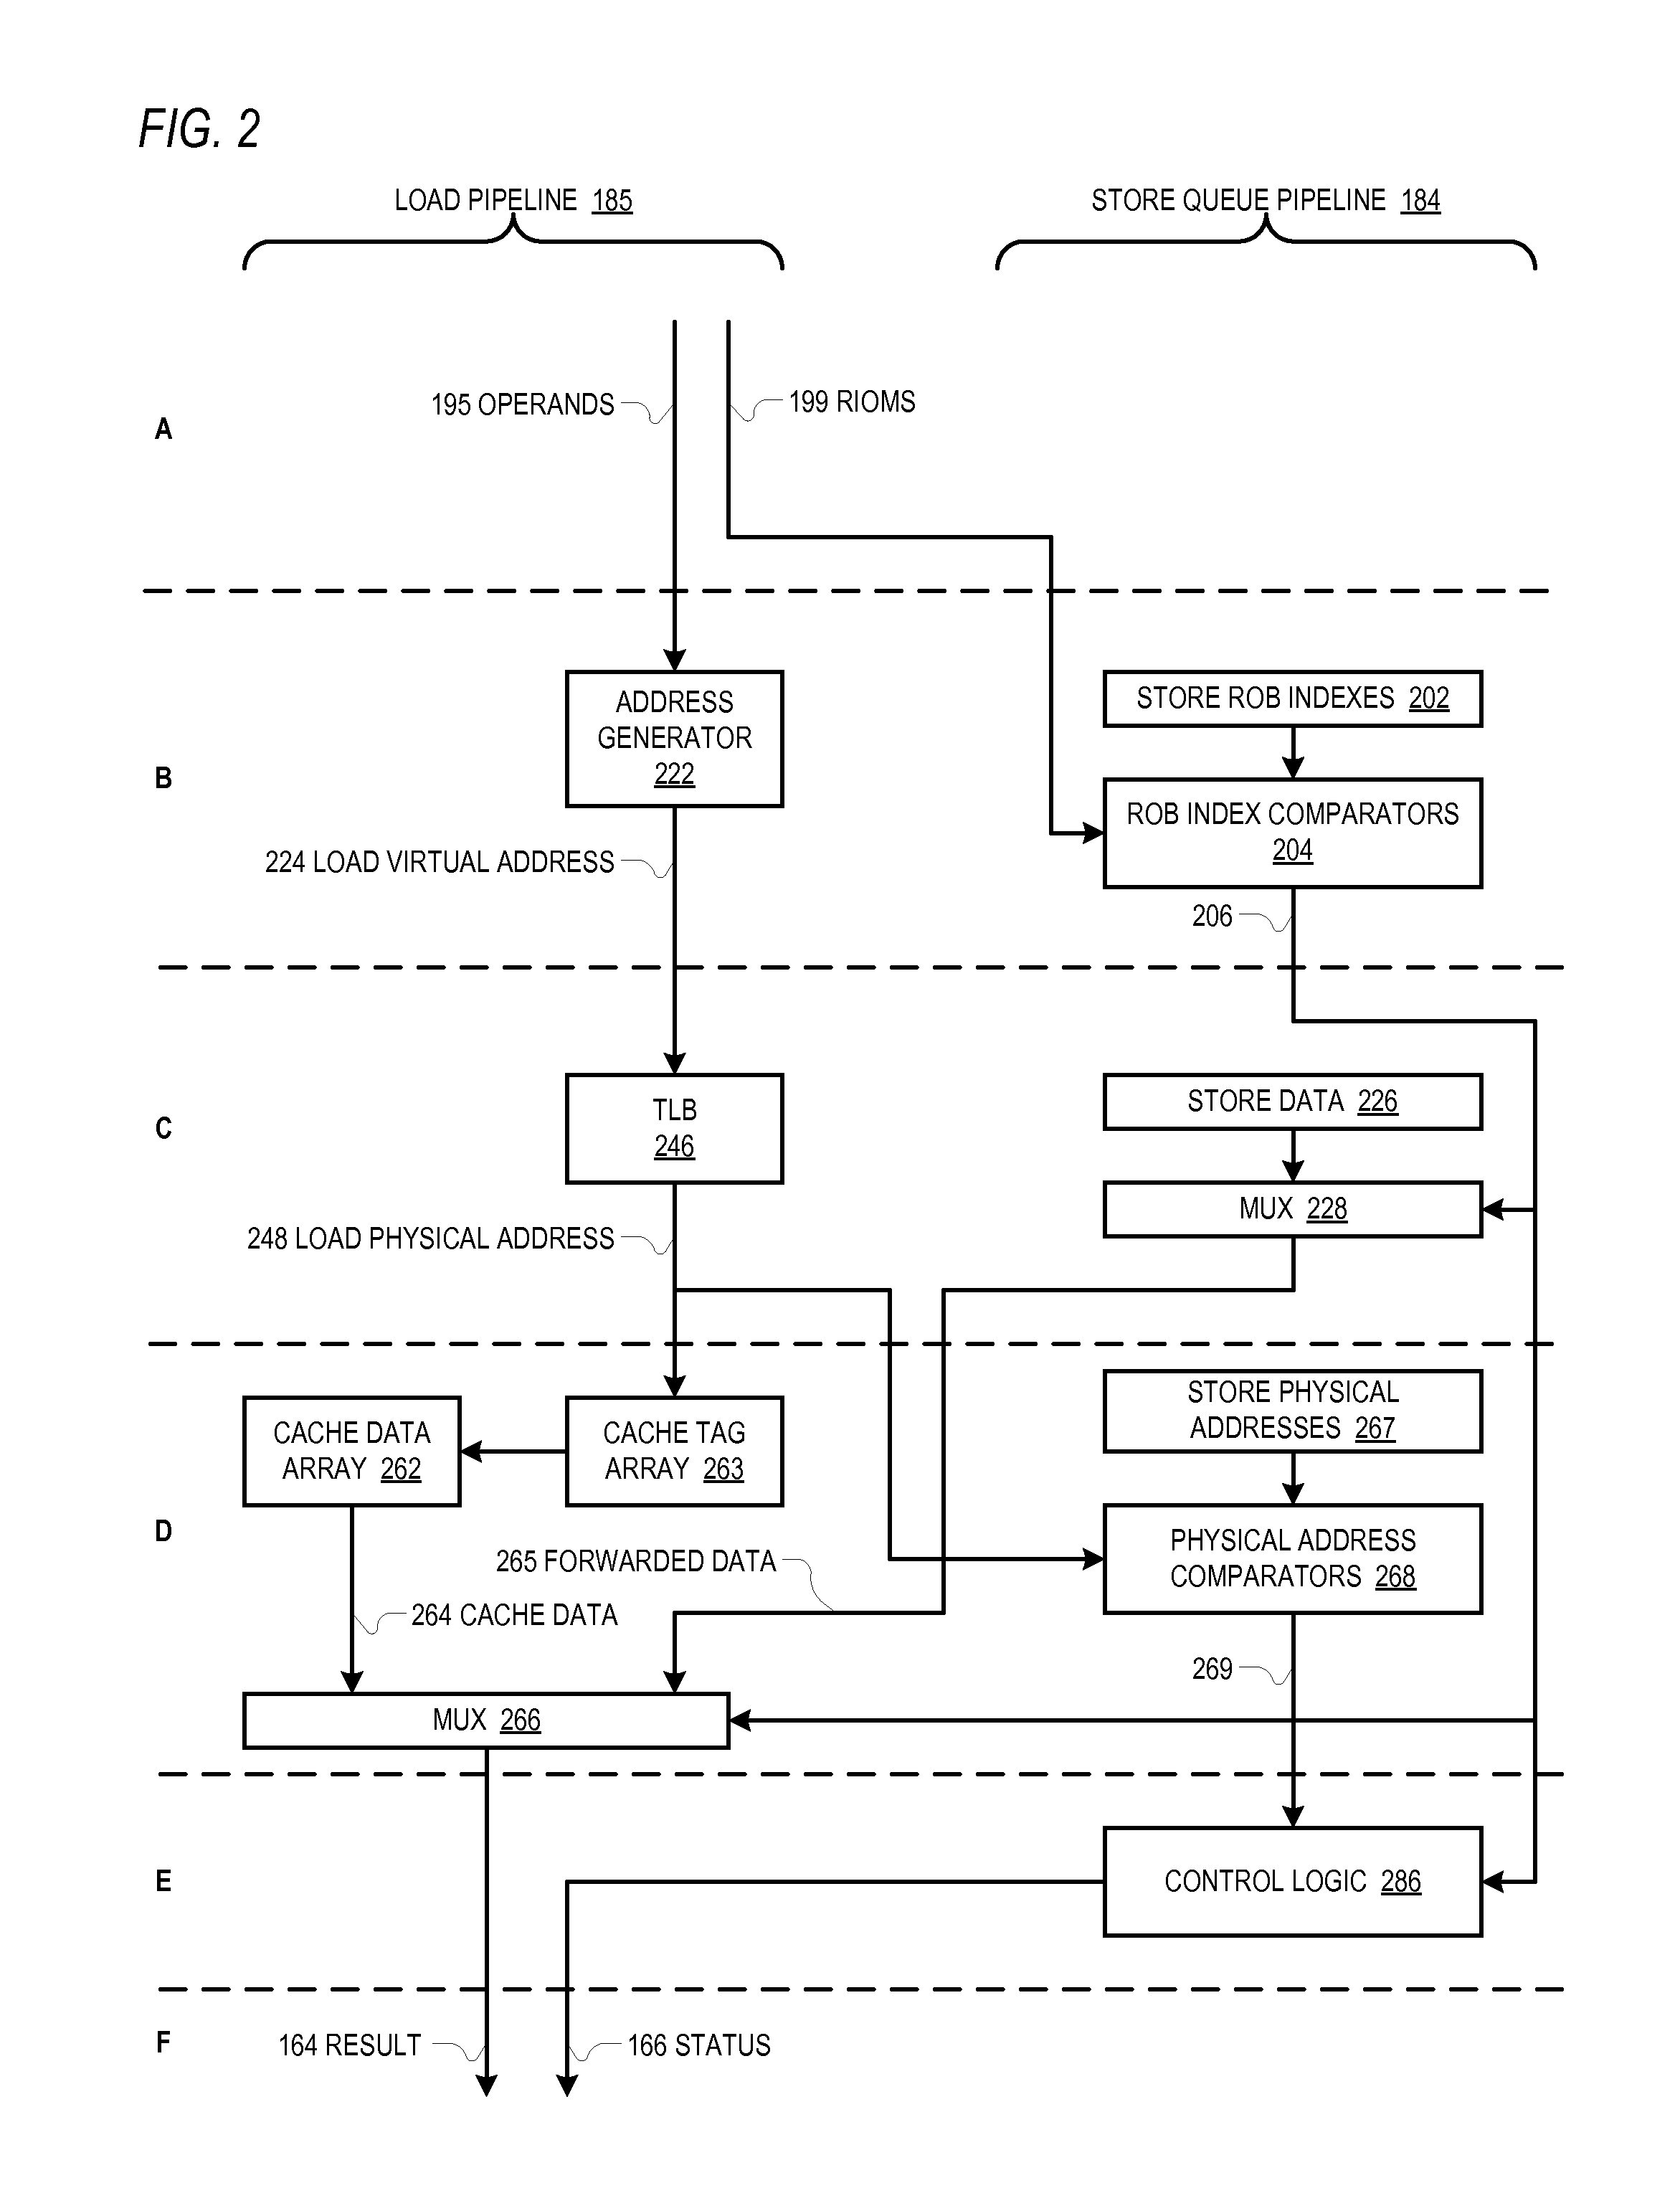 Store-to-load forwarding based on load/store address computation source information comparisons